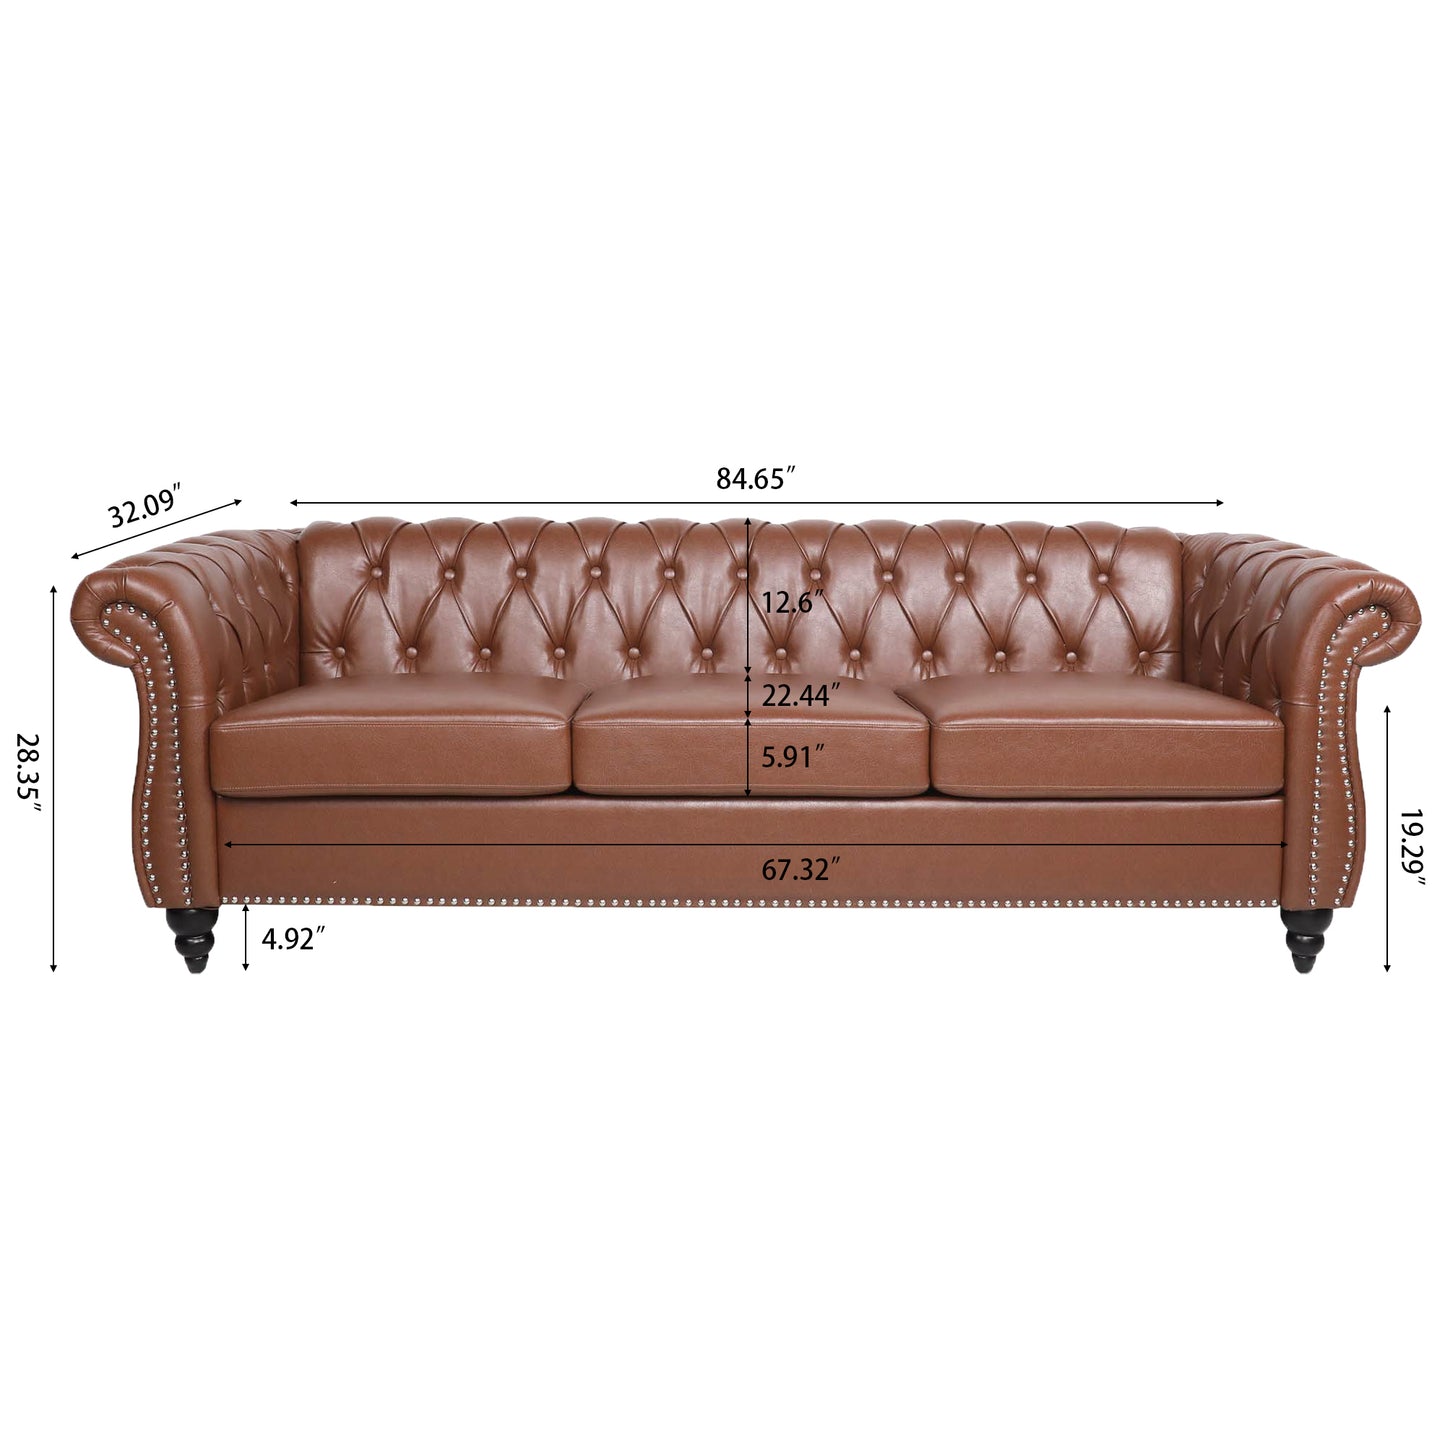 Chesterfield Three Seater Sofa in Brown Leather